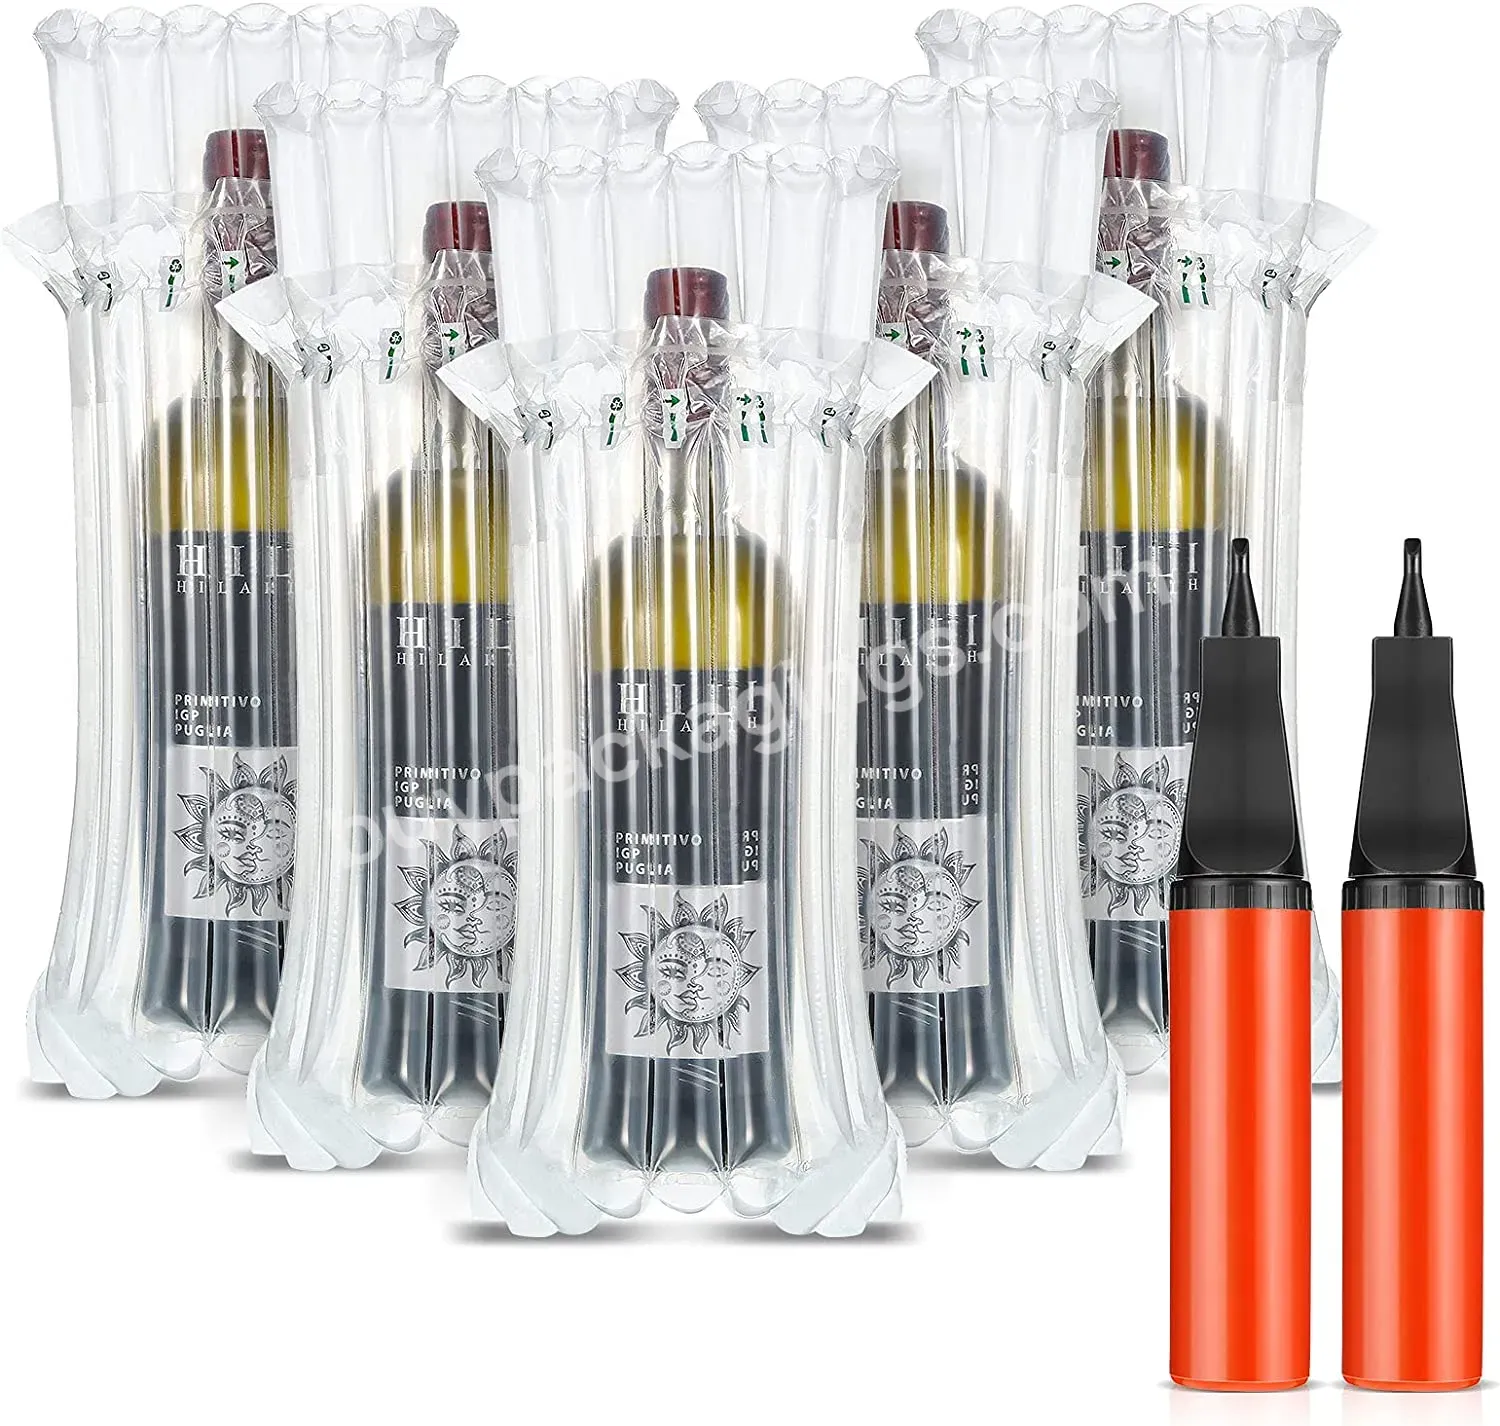 Wine Bottle Protector Reusable Inflatable Wine Travel Bags Inflatable Air Column Cushion Bags Safe Transportation Of Bottles - Buy Bottle Protector,Wine Bottle Protector,Wine Bottle Protector For Travel.